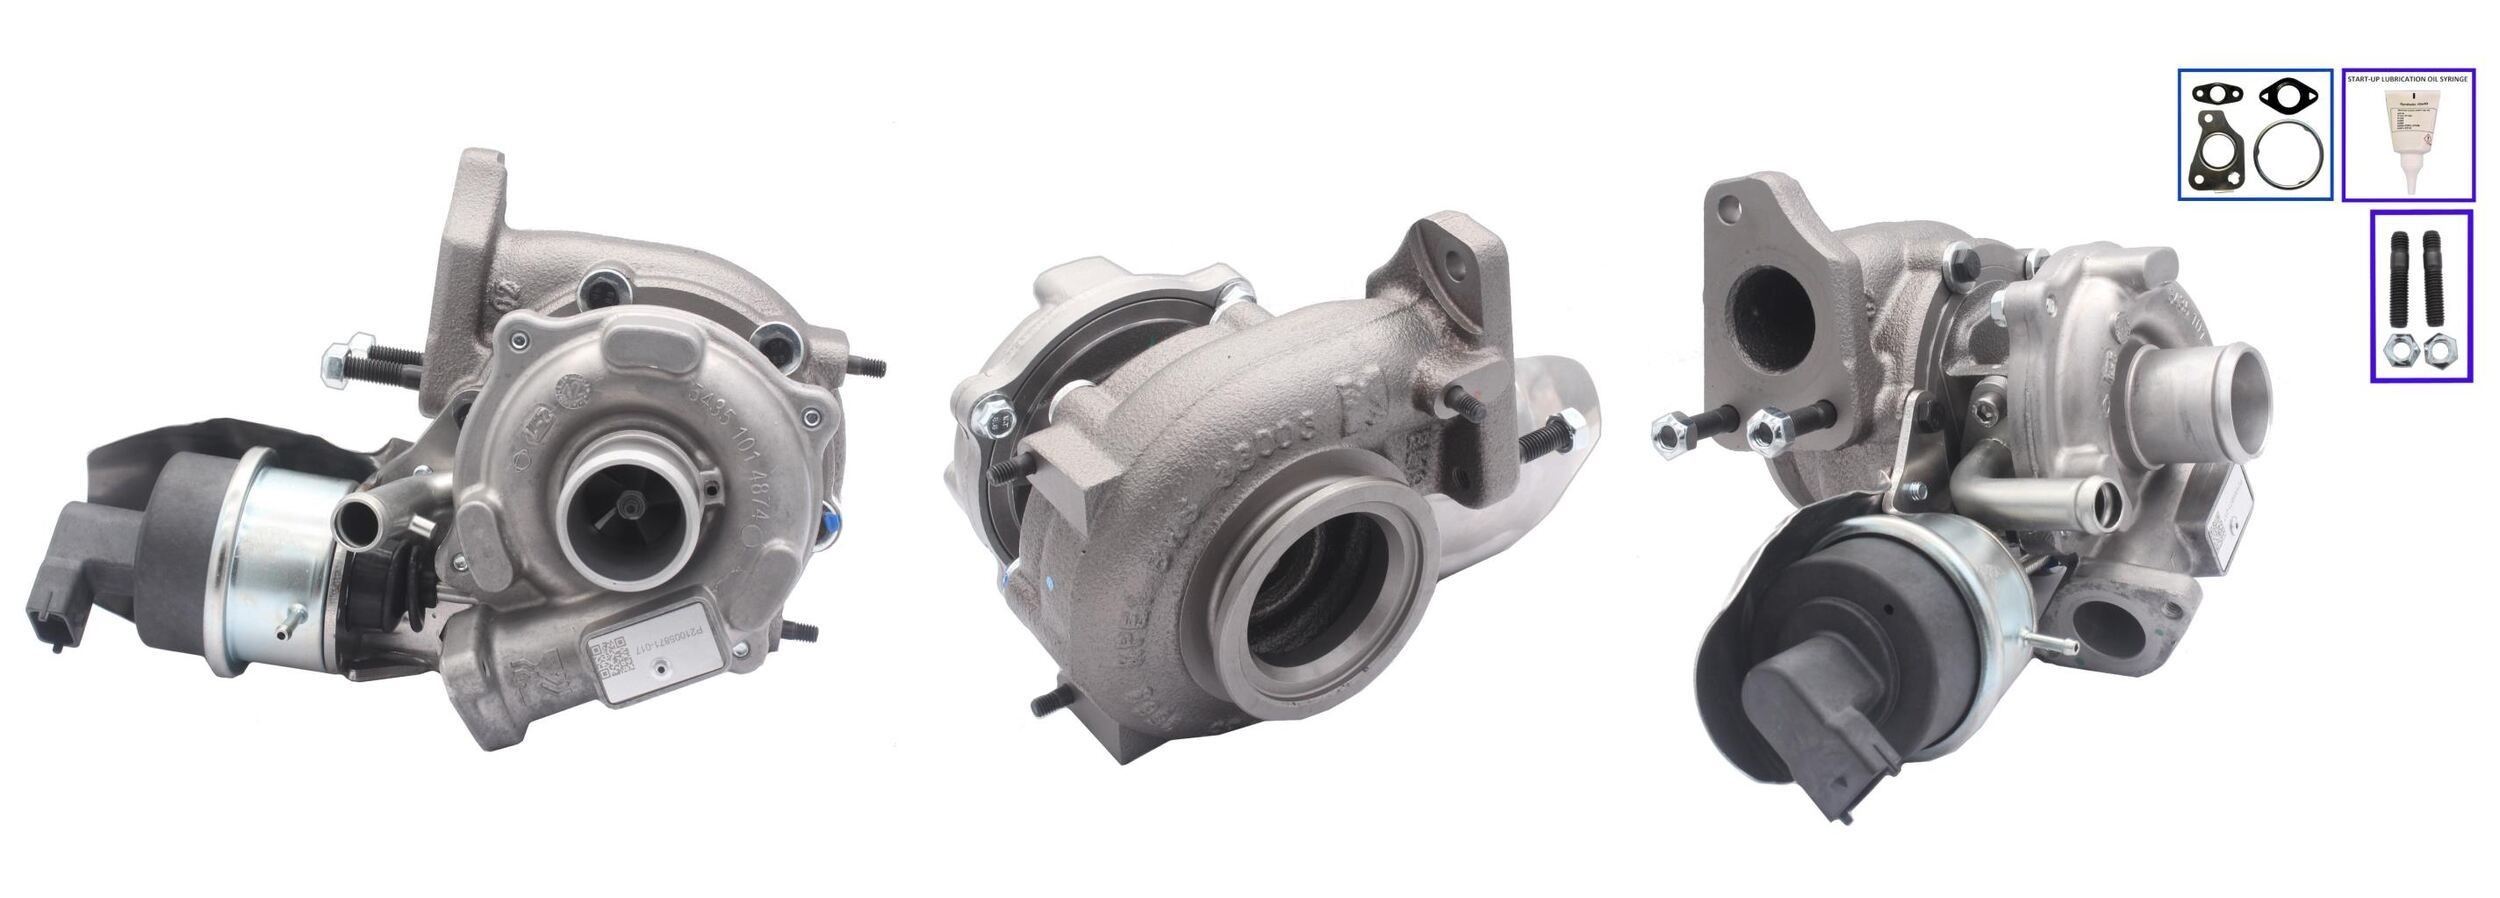 Chevrolet Turbocharger LUCAS LTRPA54359880027 at a good price